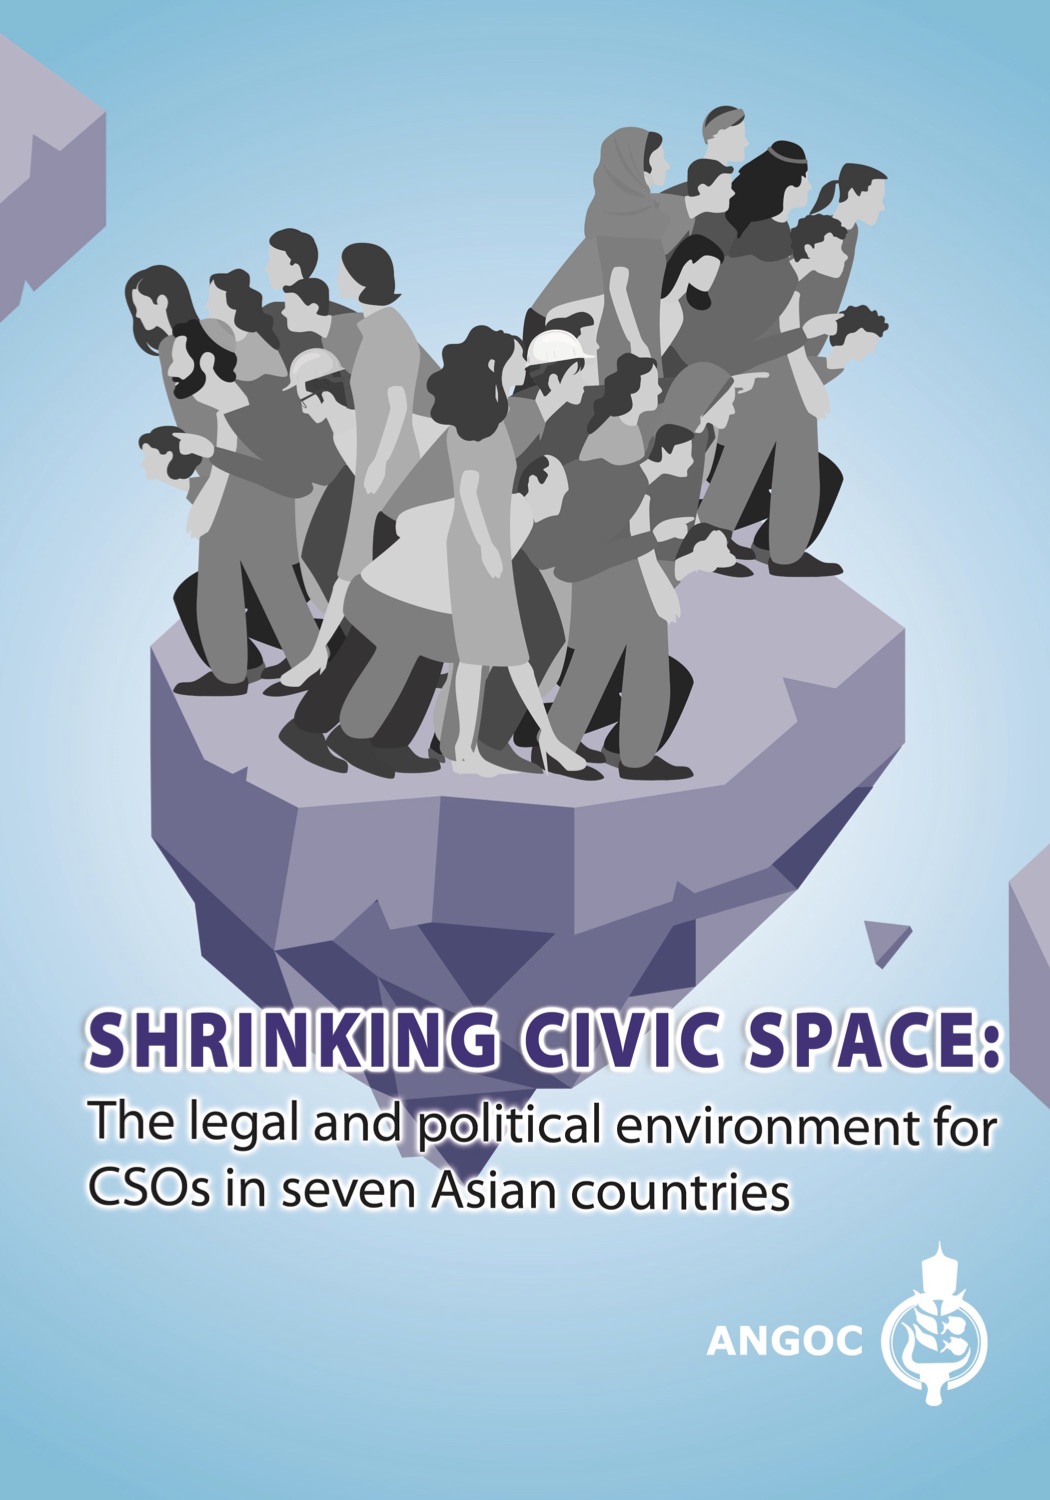 ANGOC Launches Report on Shrinking Civic Space in Seven Asian Countries